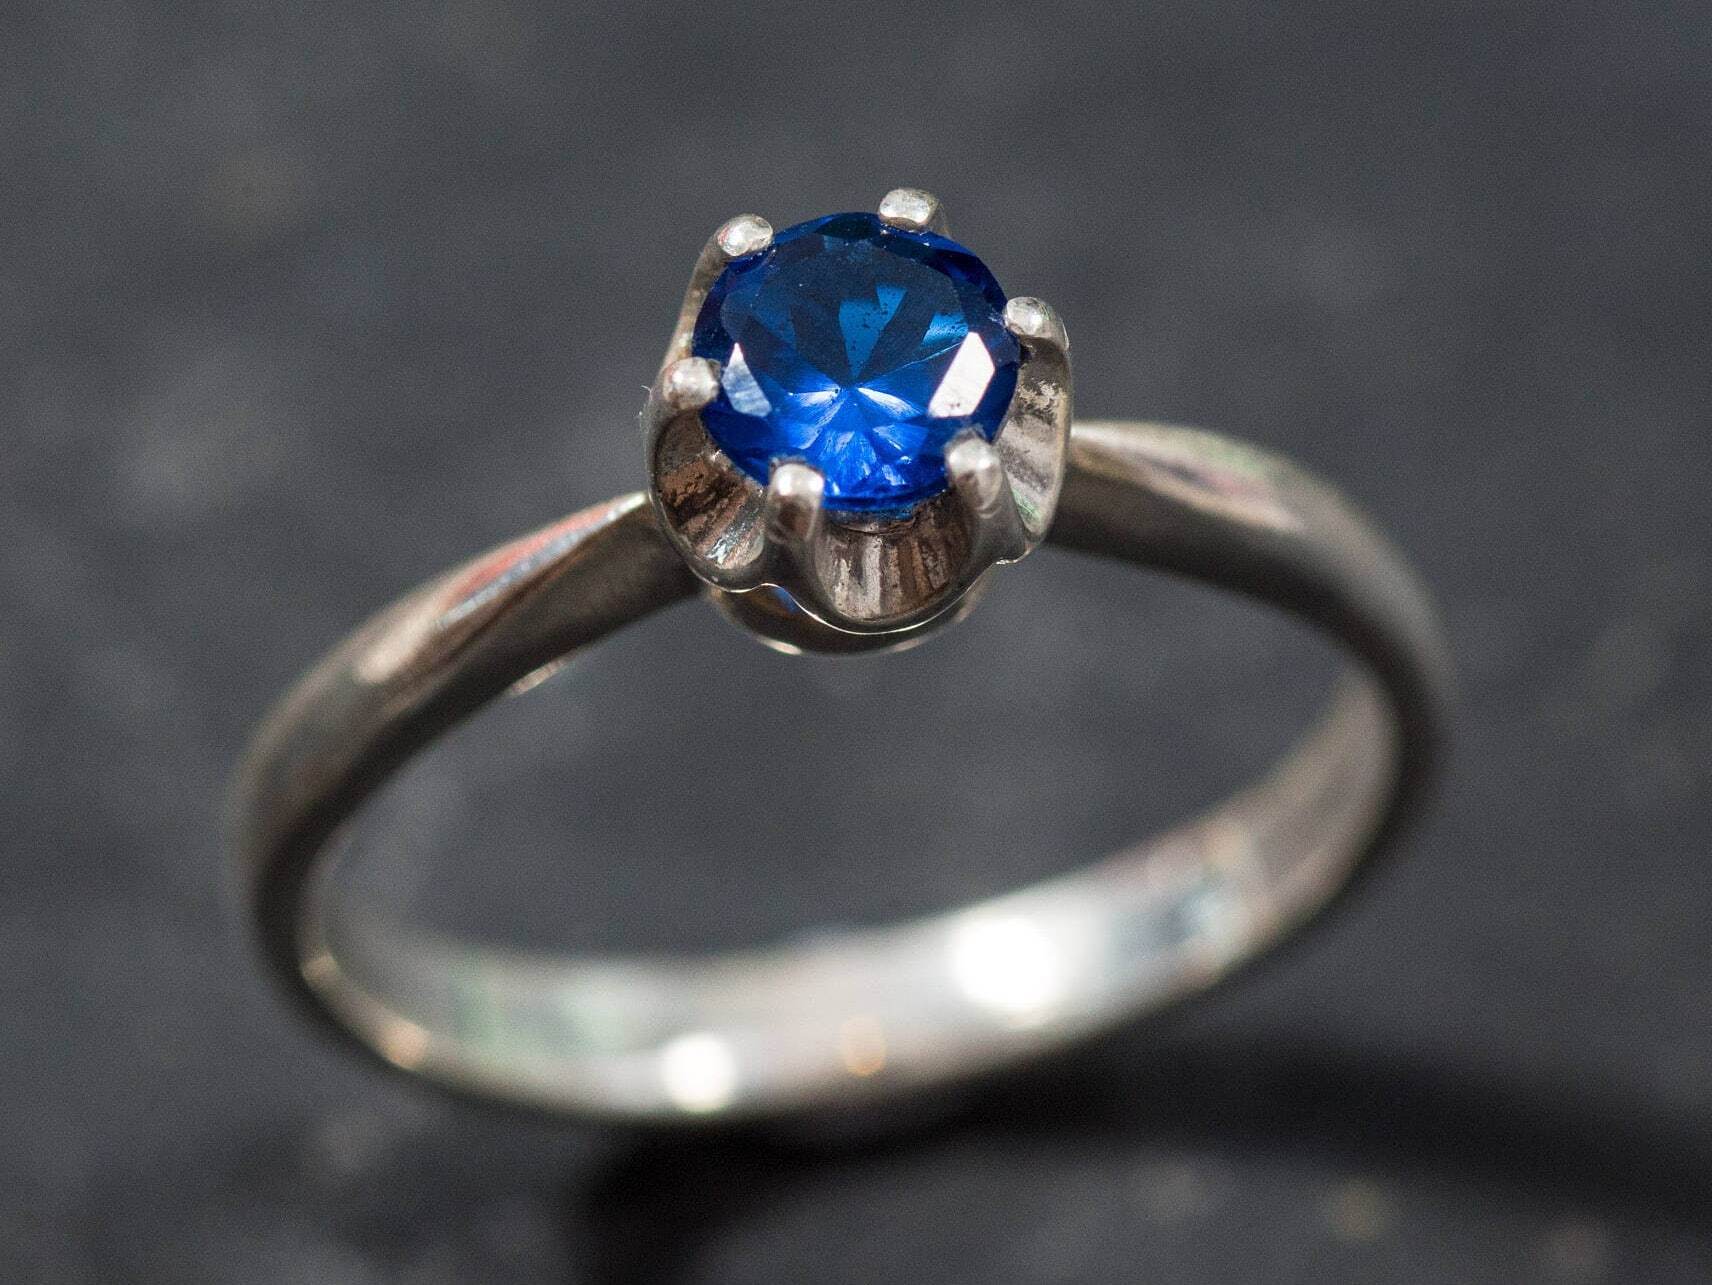 Solitaire Sapphire Ring - Dainty Blue Ring, September Birthstone Ring